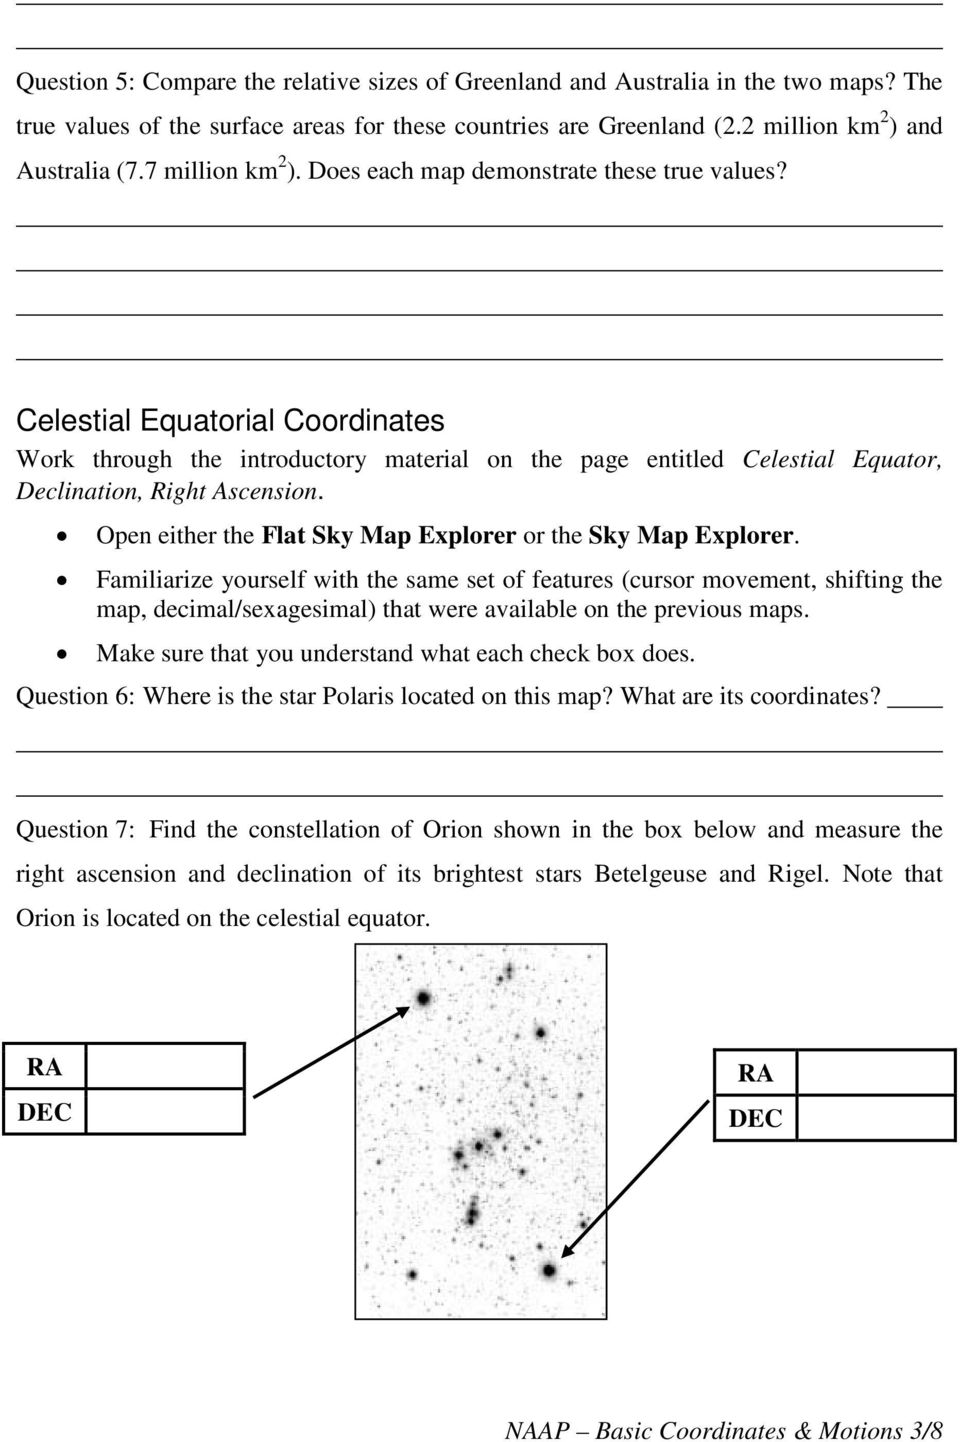 Celestial Equatorial Coordinates Work through the introductory material on the page entitled Celestial Equator, Declination, Right Ascension.